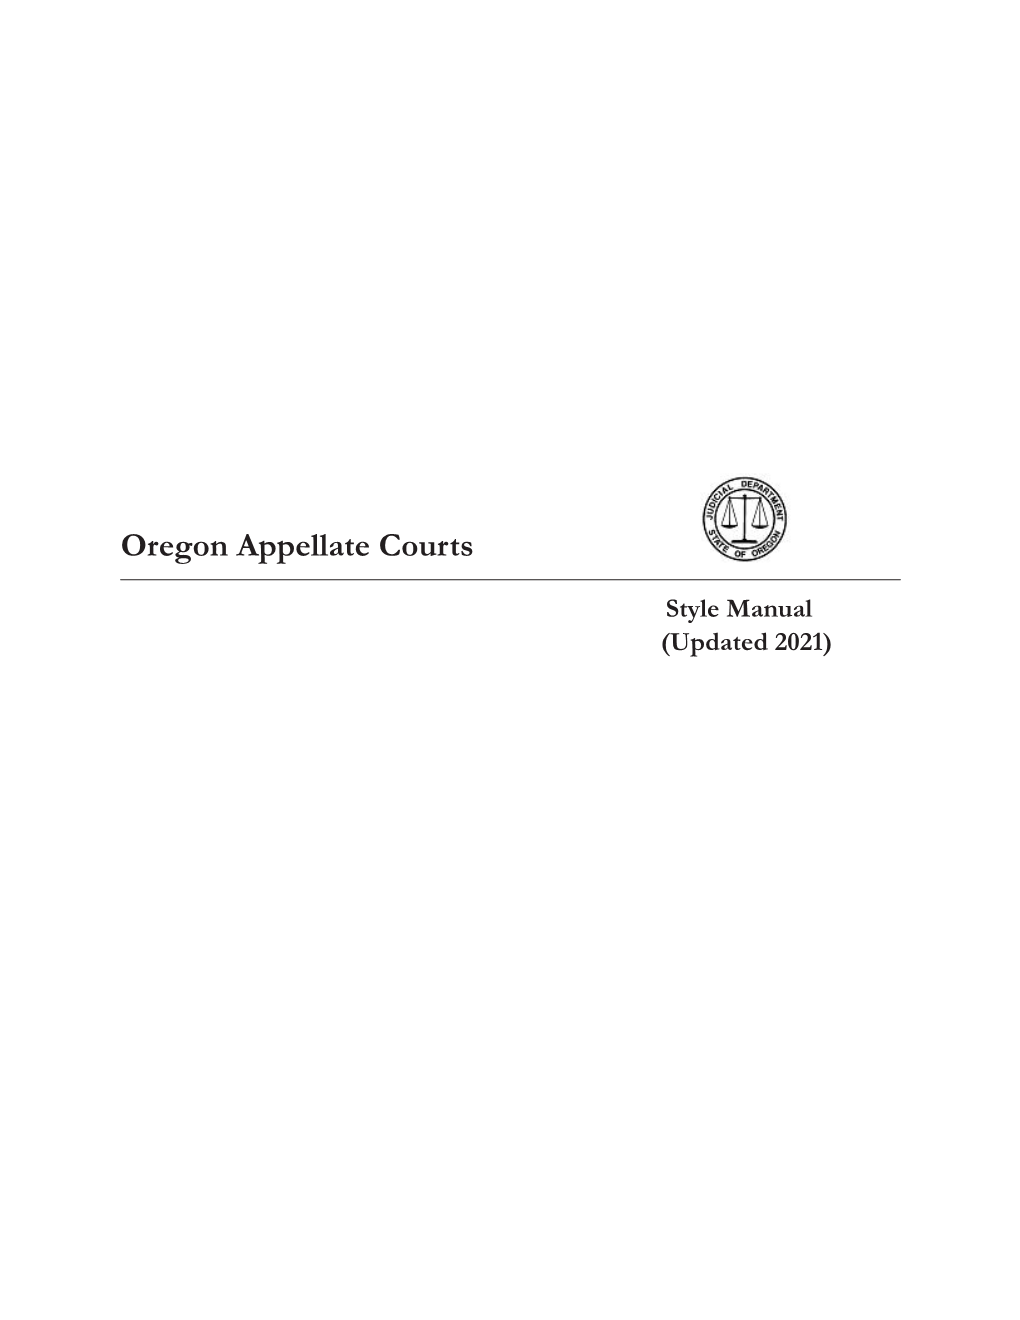 Oregon Appellate Courts